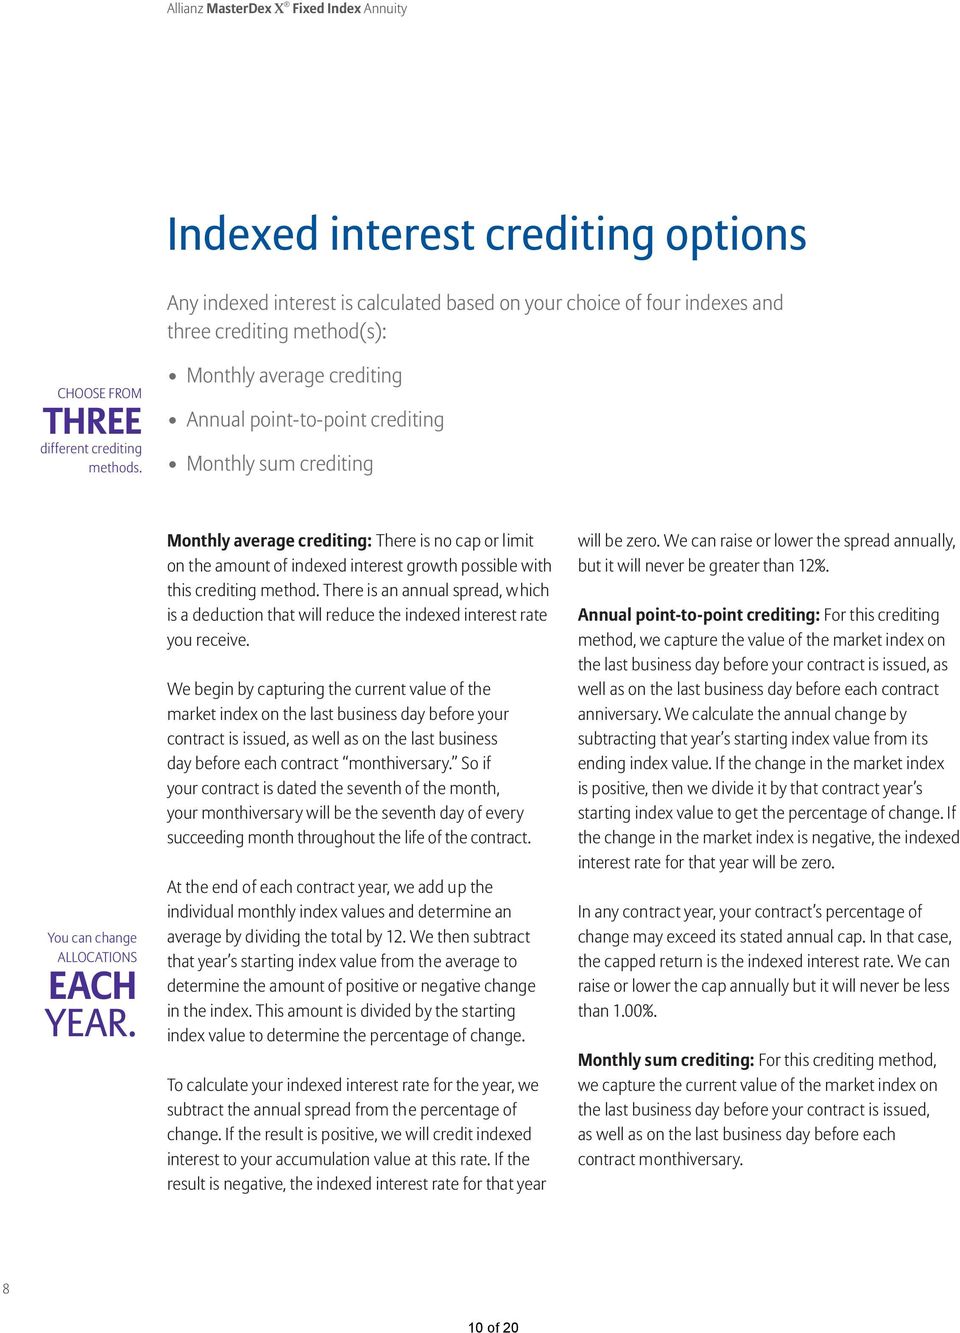 Monthly average crediting: There is no cap or limit on the amount of indexed interest growth possible with this crediting method.